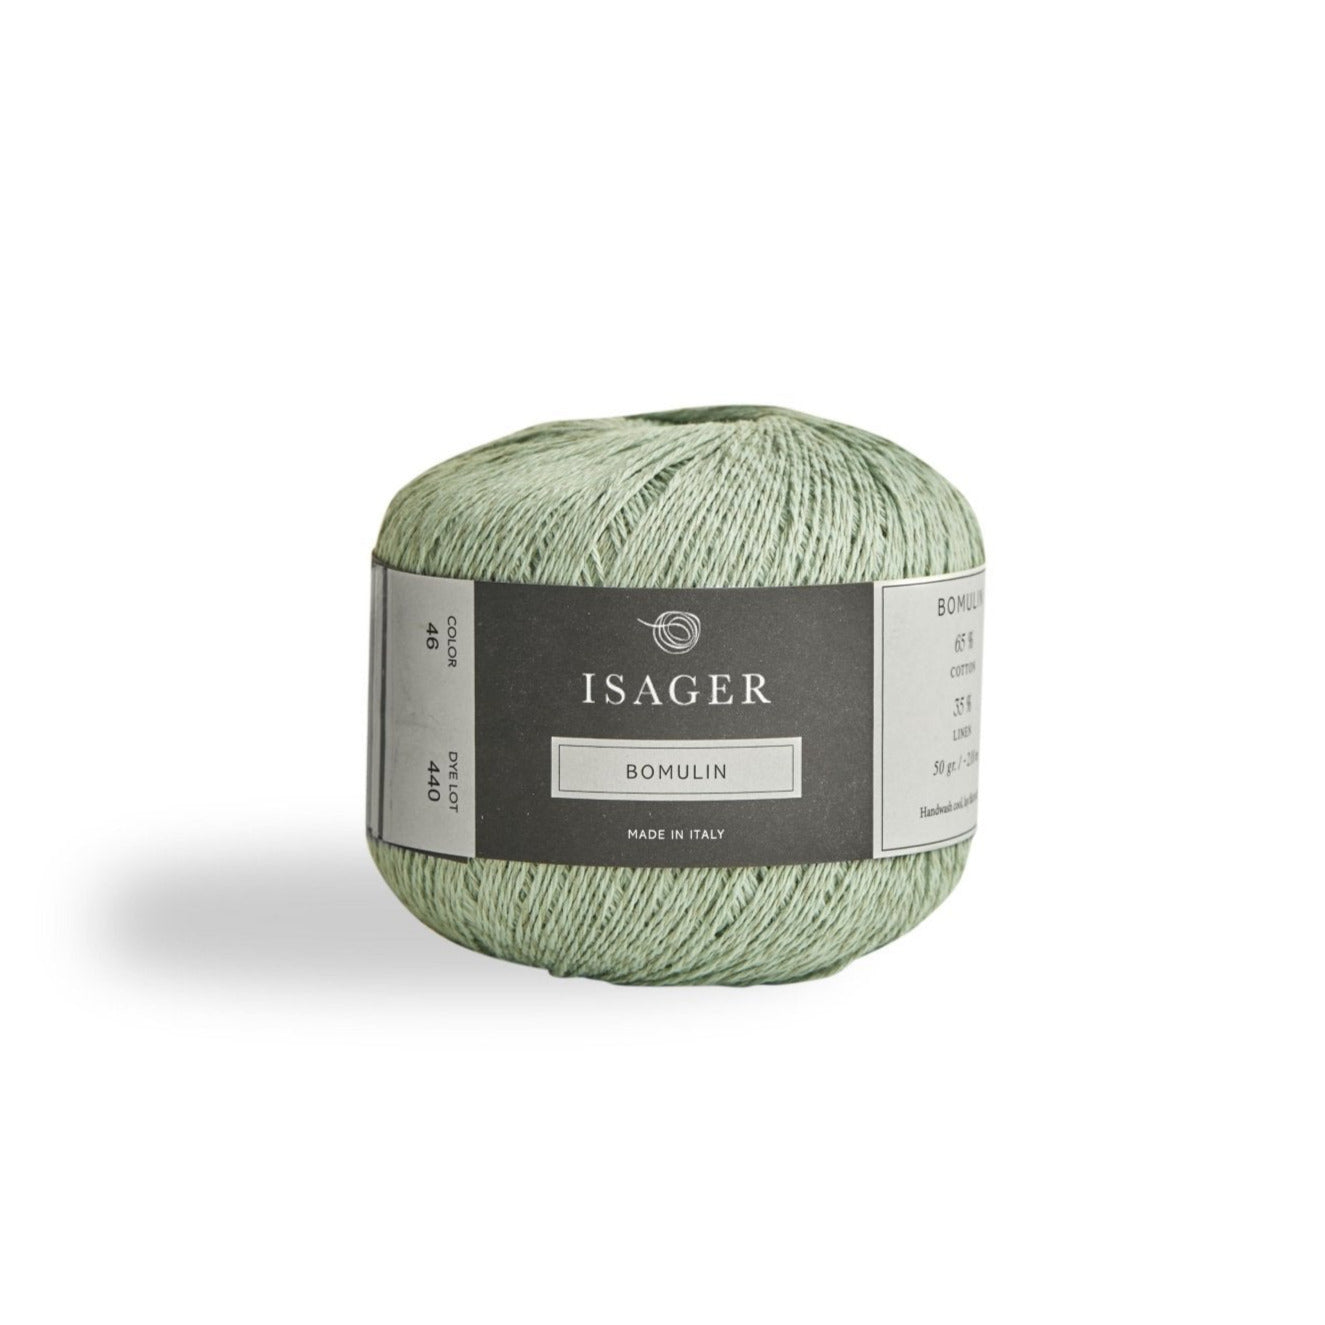 Isager Bomulin - 46 - 3 Ply - Cotton - The Little Yarn Store